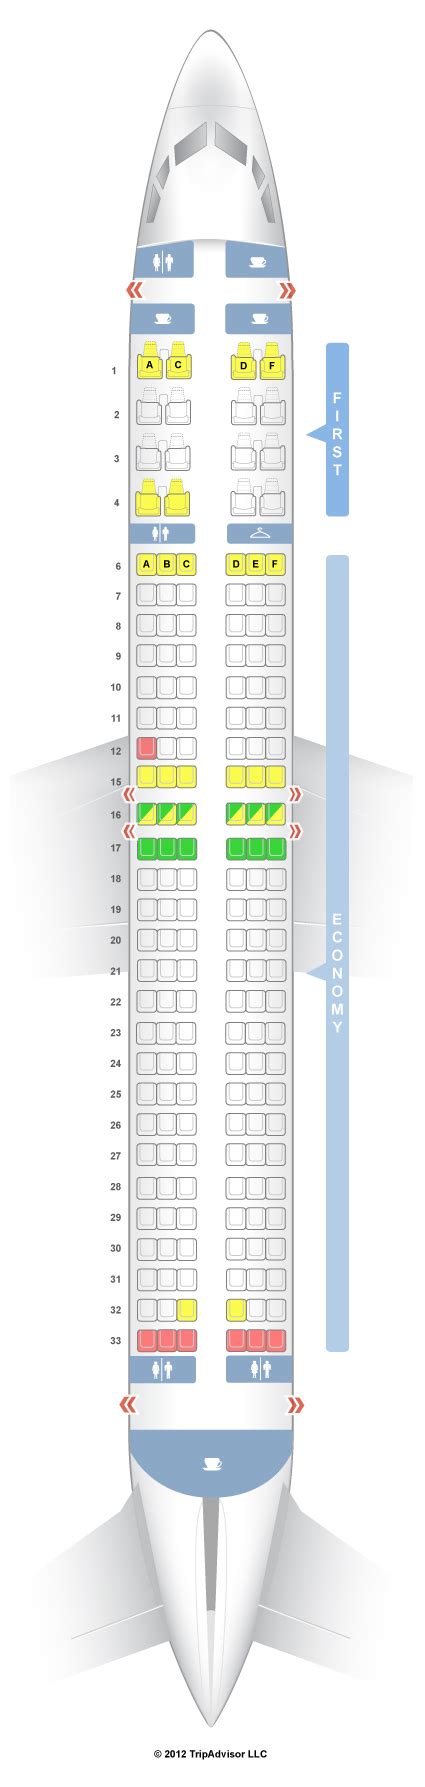 Alaska Airlines 737 Seating Chart | Images and Photos finder